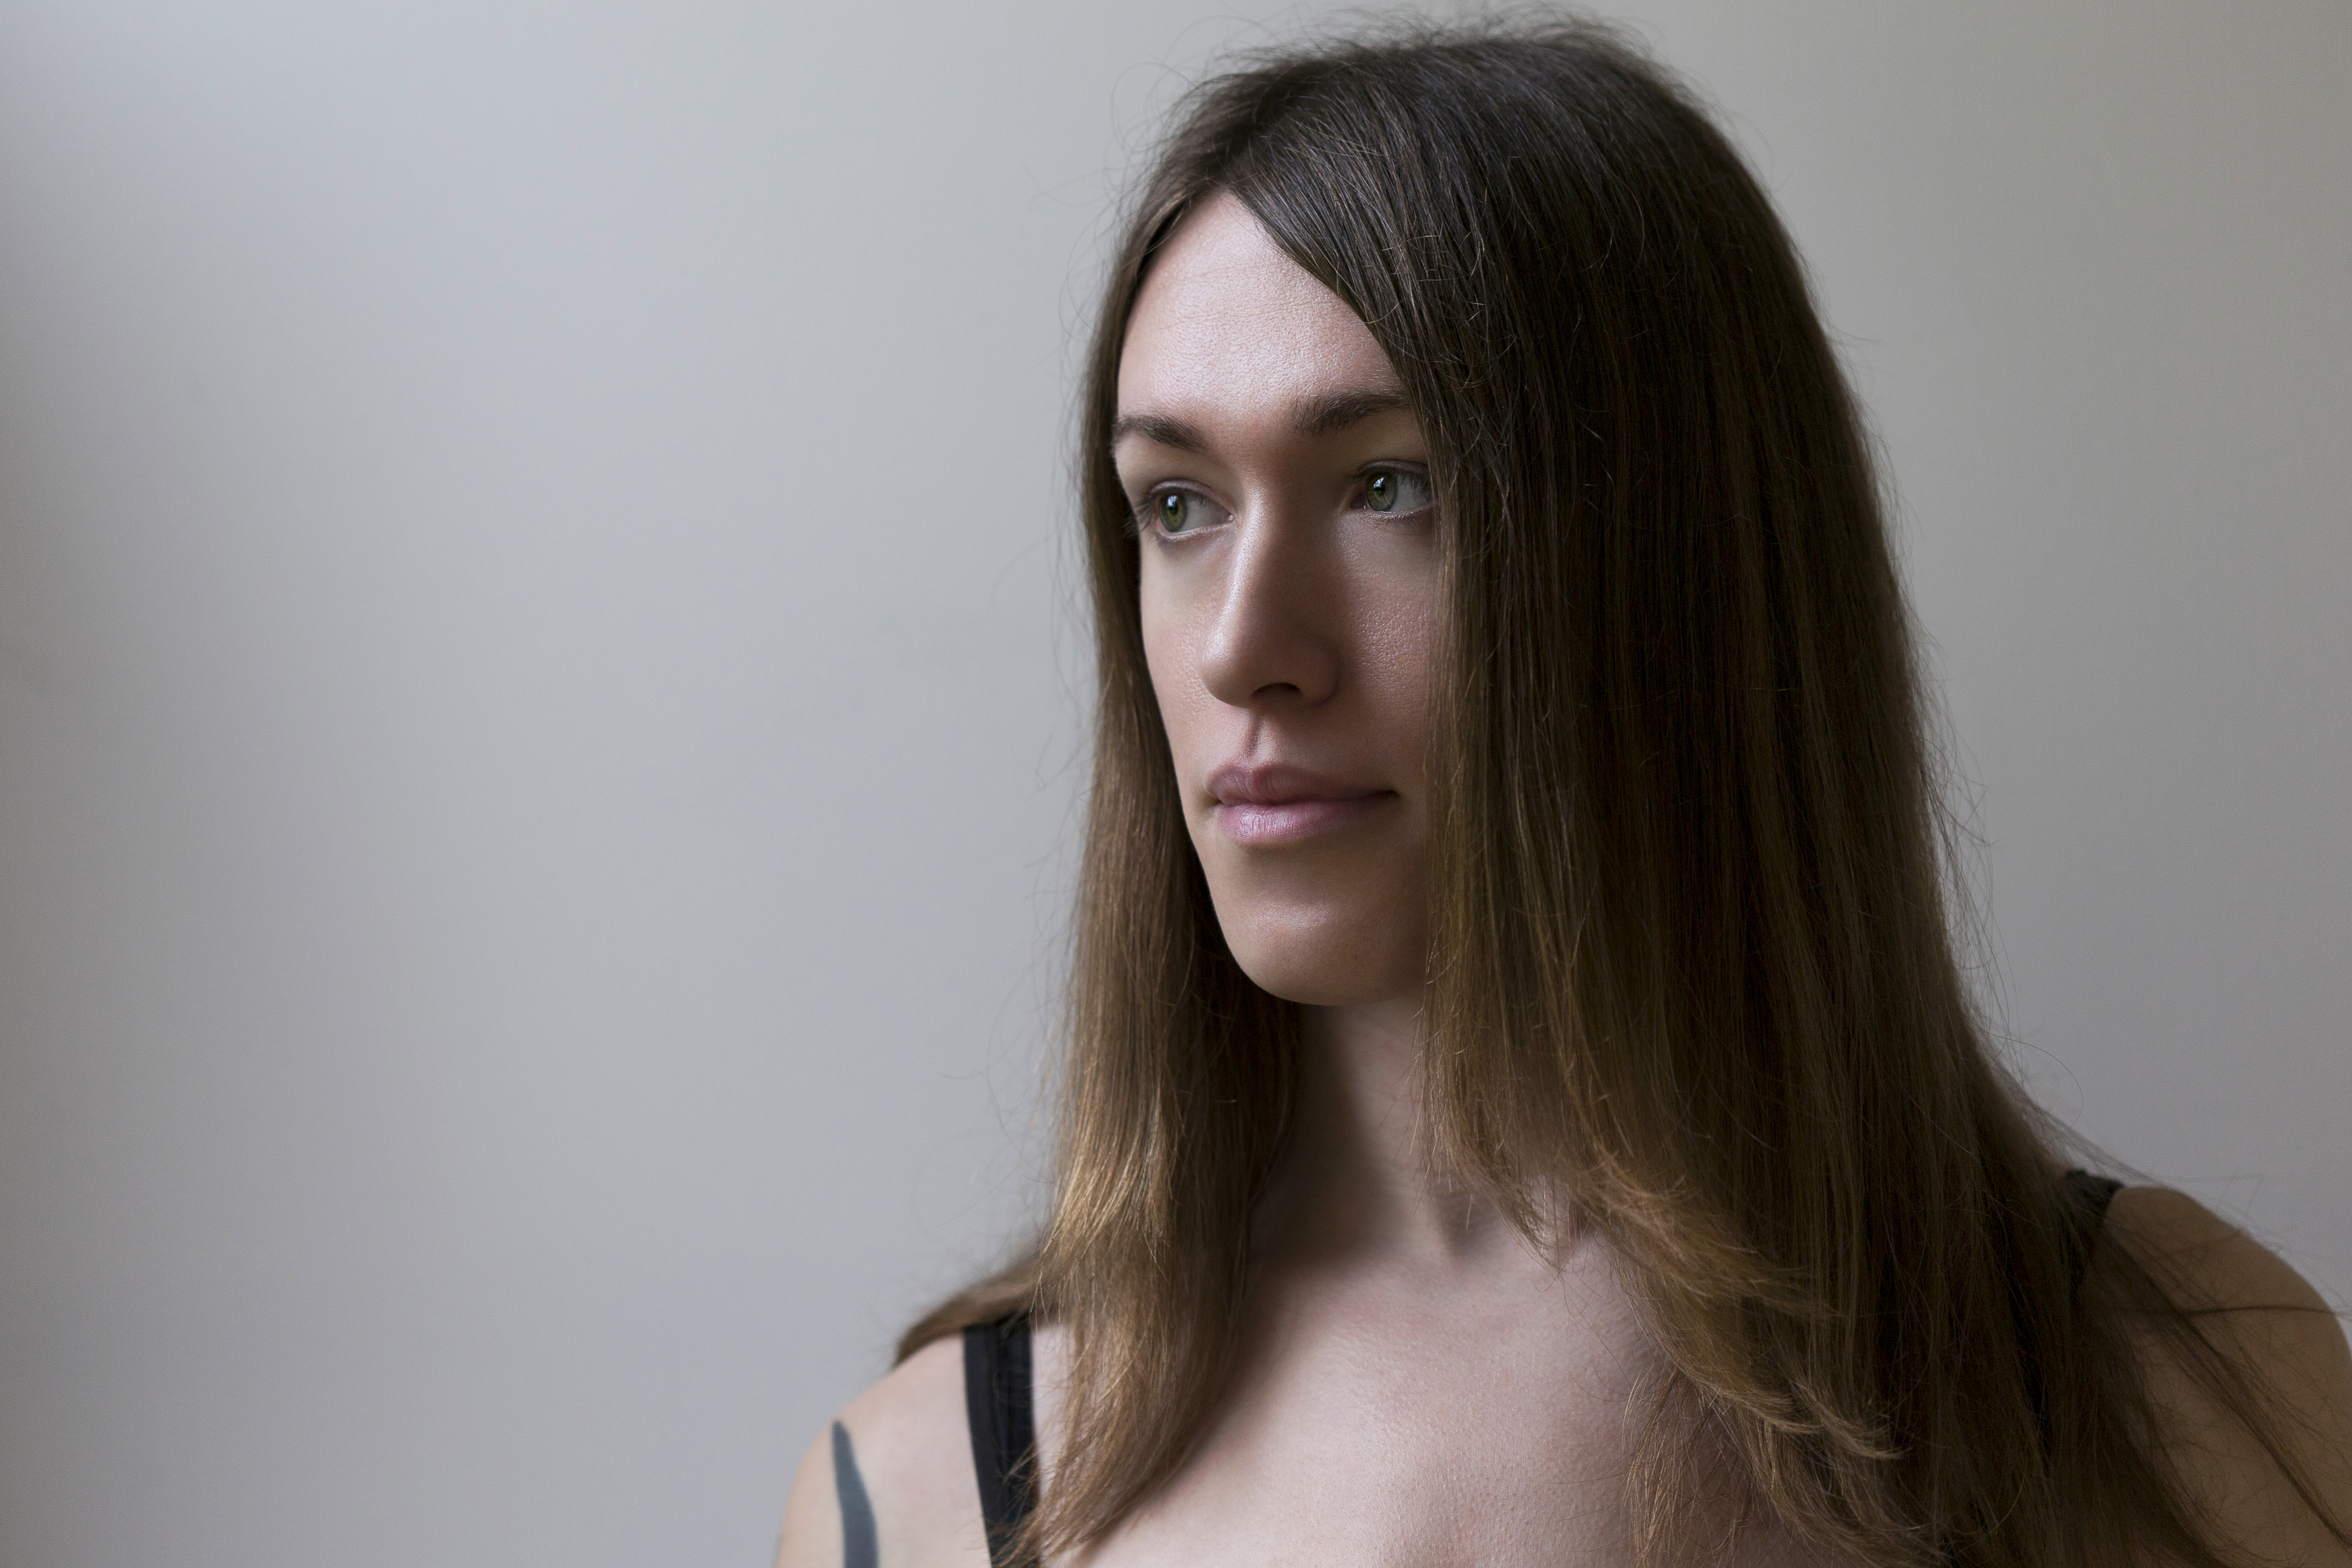 Trans patient - woman with long brown hair